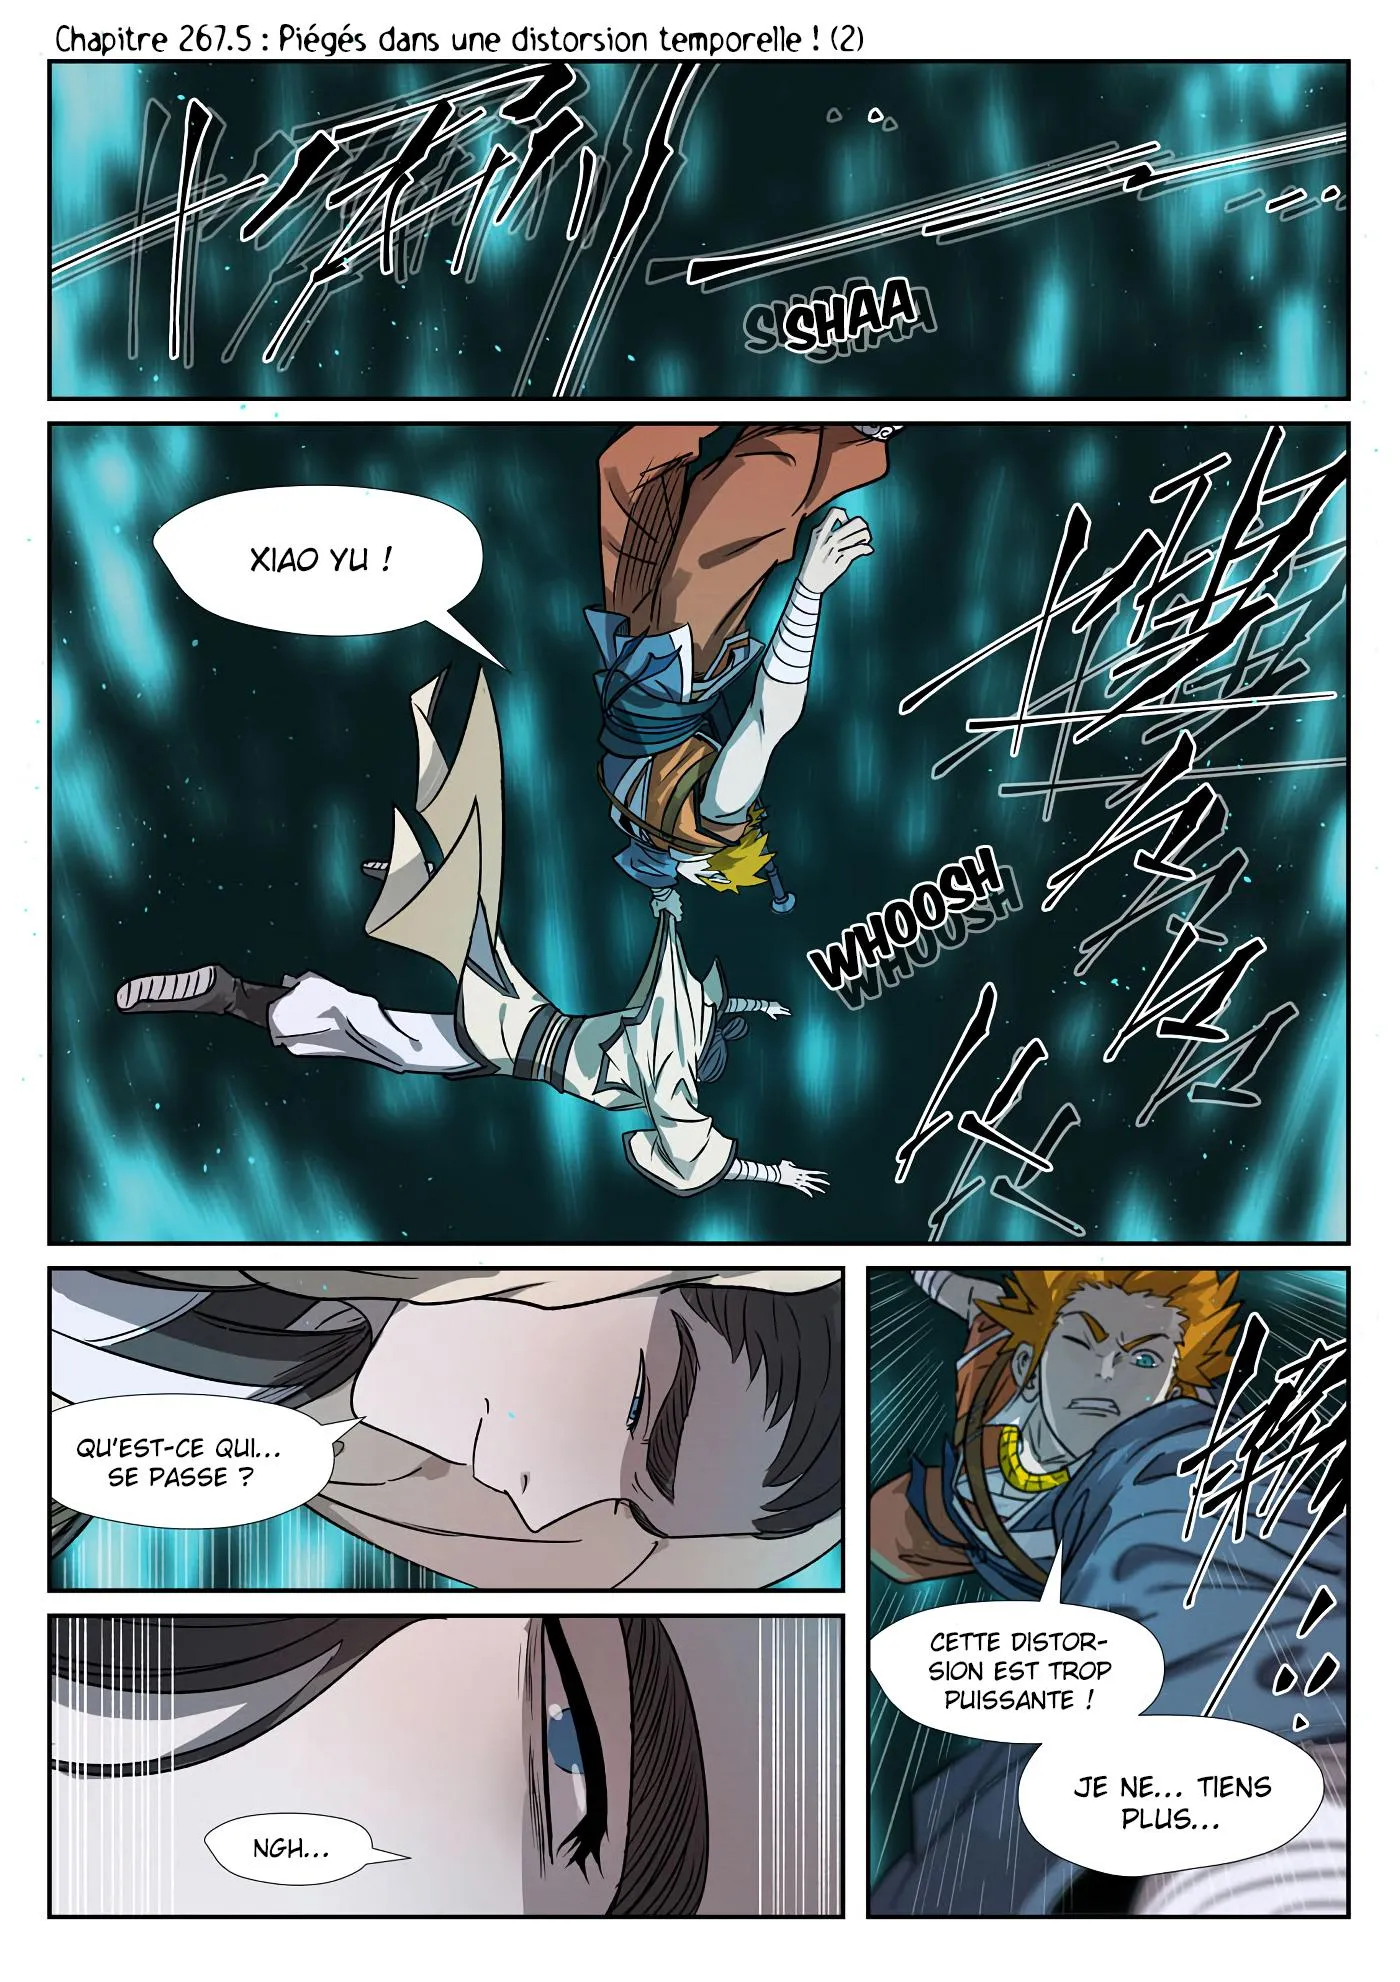 Tales Of Demons And Gods: Chapter chapitre-267.5 - Page 2